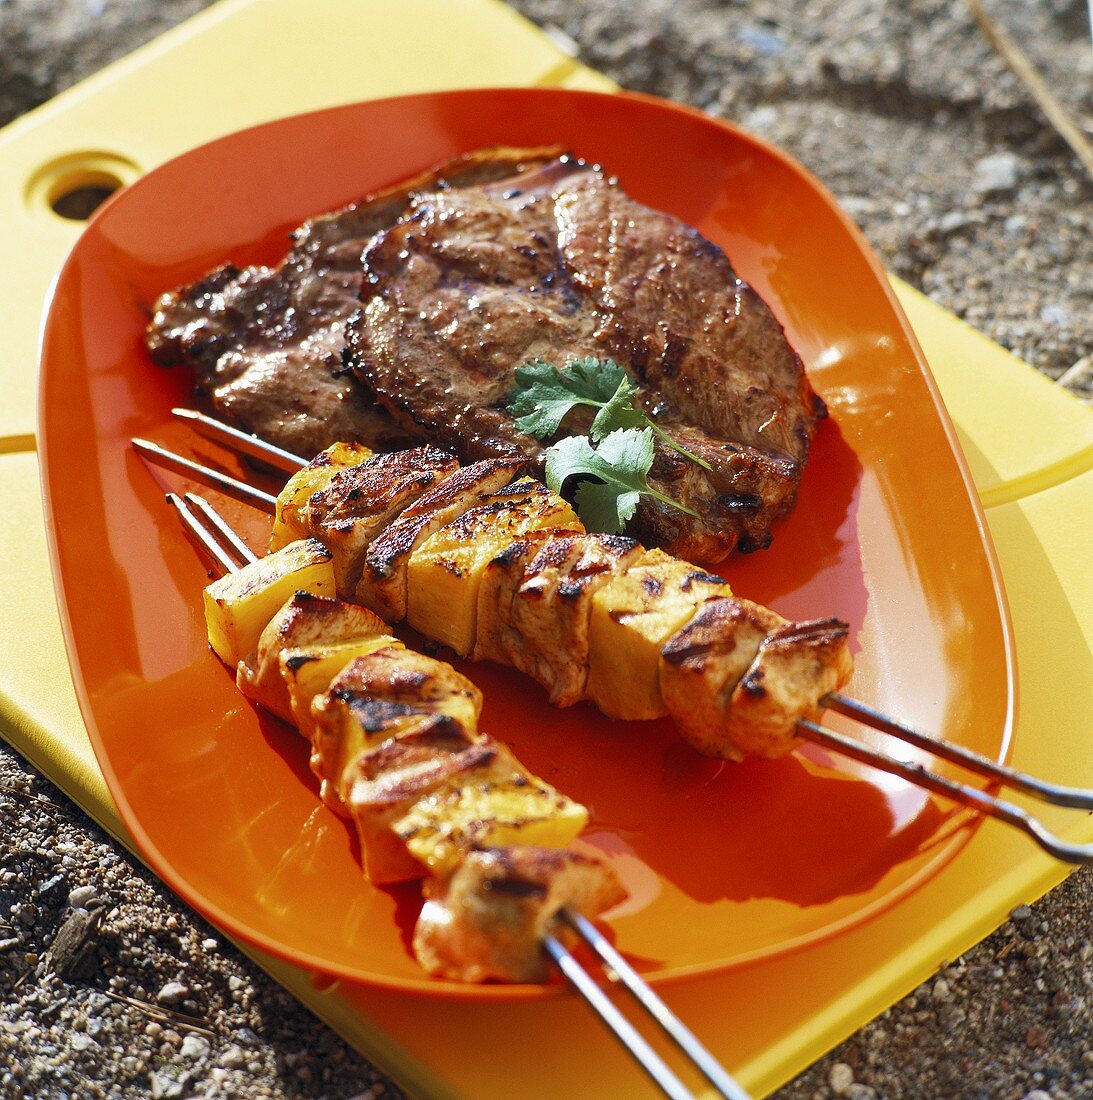 Grilled chicken and pineapple kebabs and pork neck